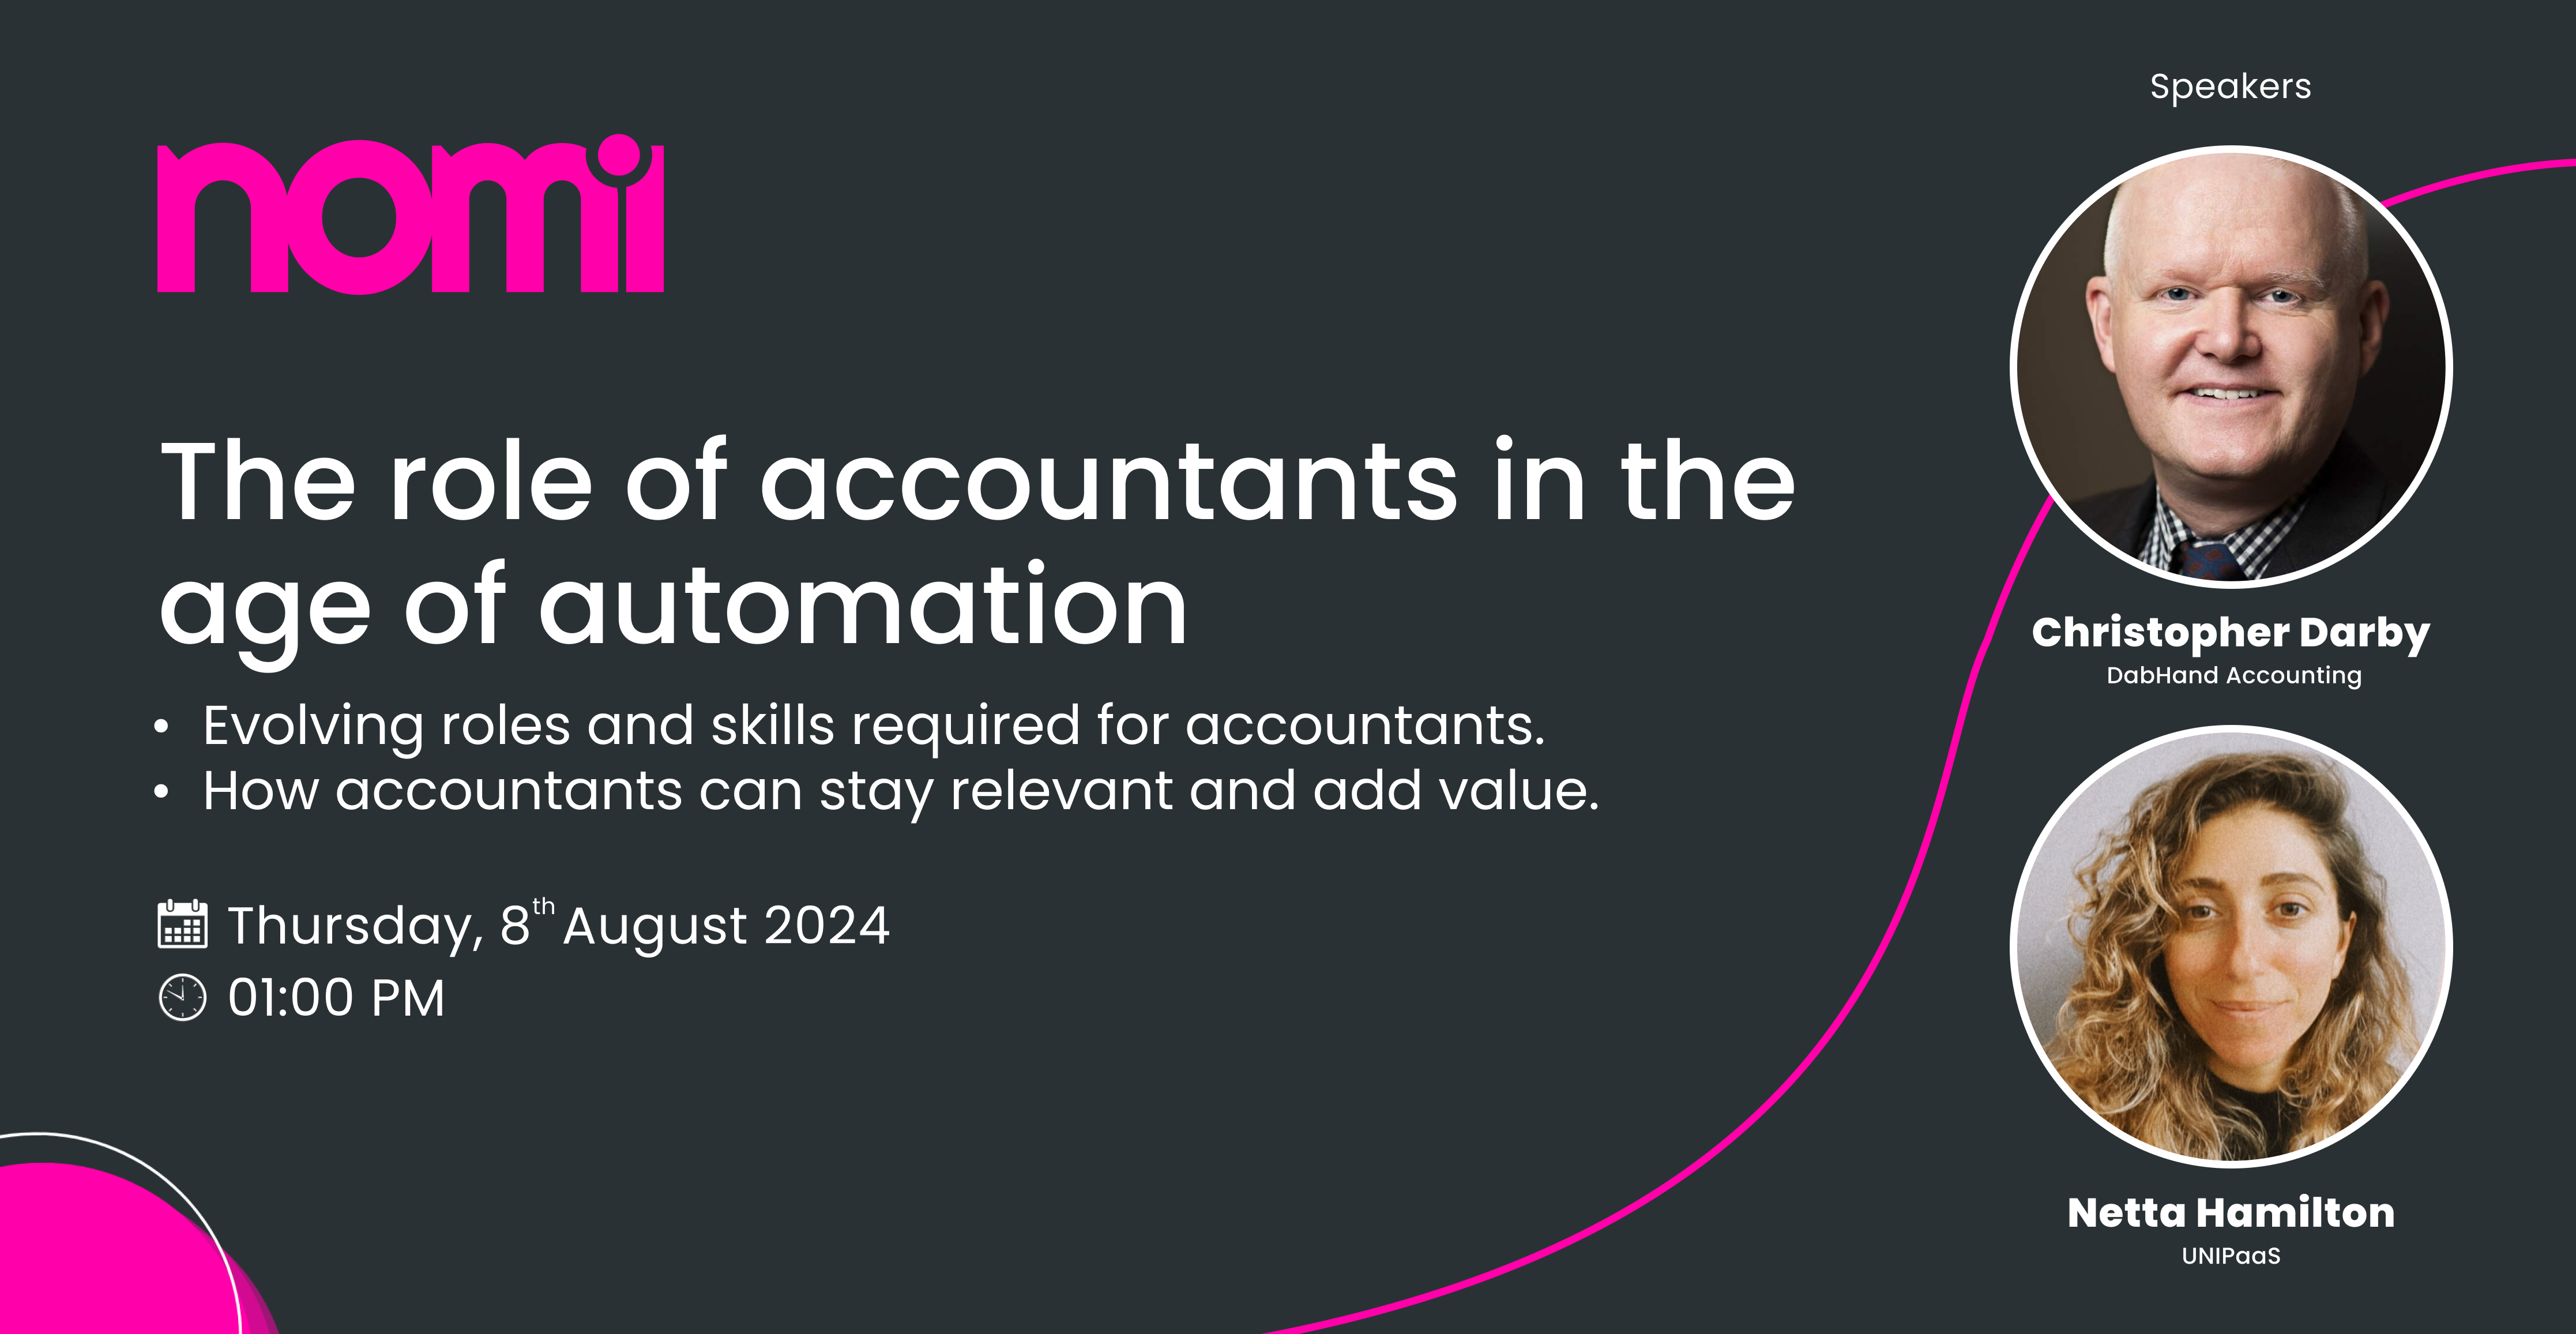 The role of accountants in the age of automation